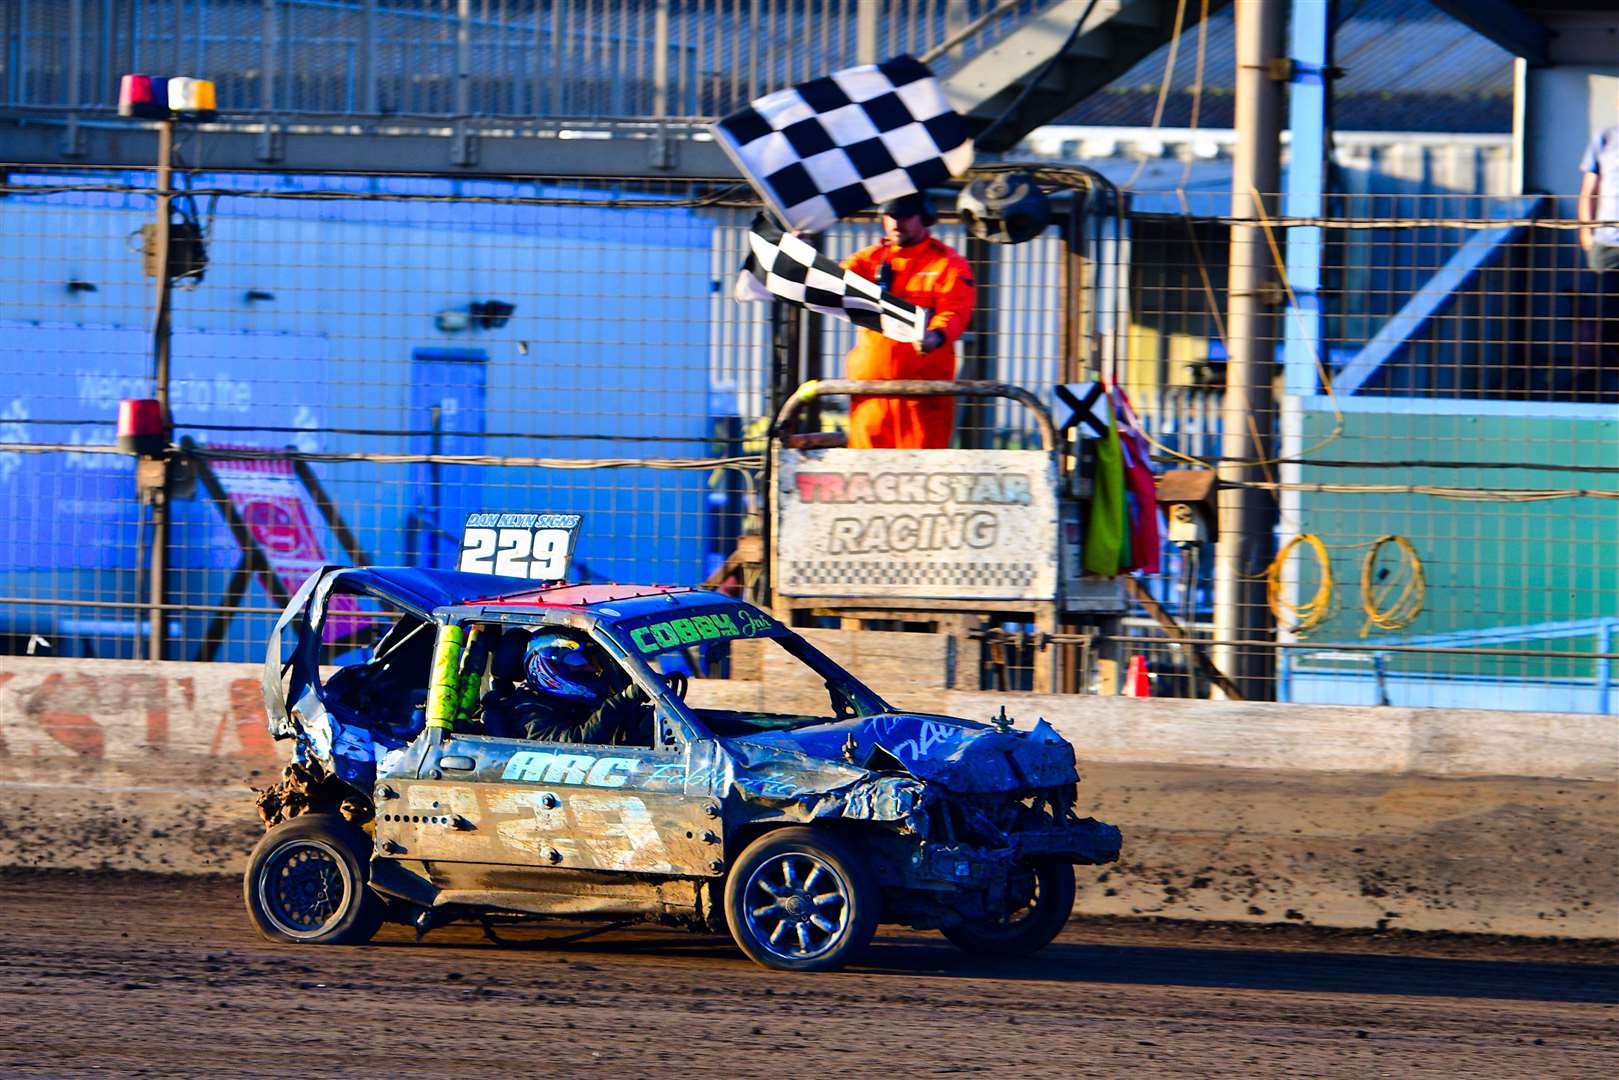 Harry Cobb takes the chequered flag to win his biggest title yet with the Micro Banger UK Championship